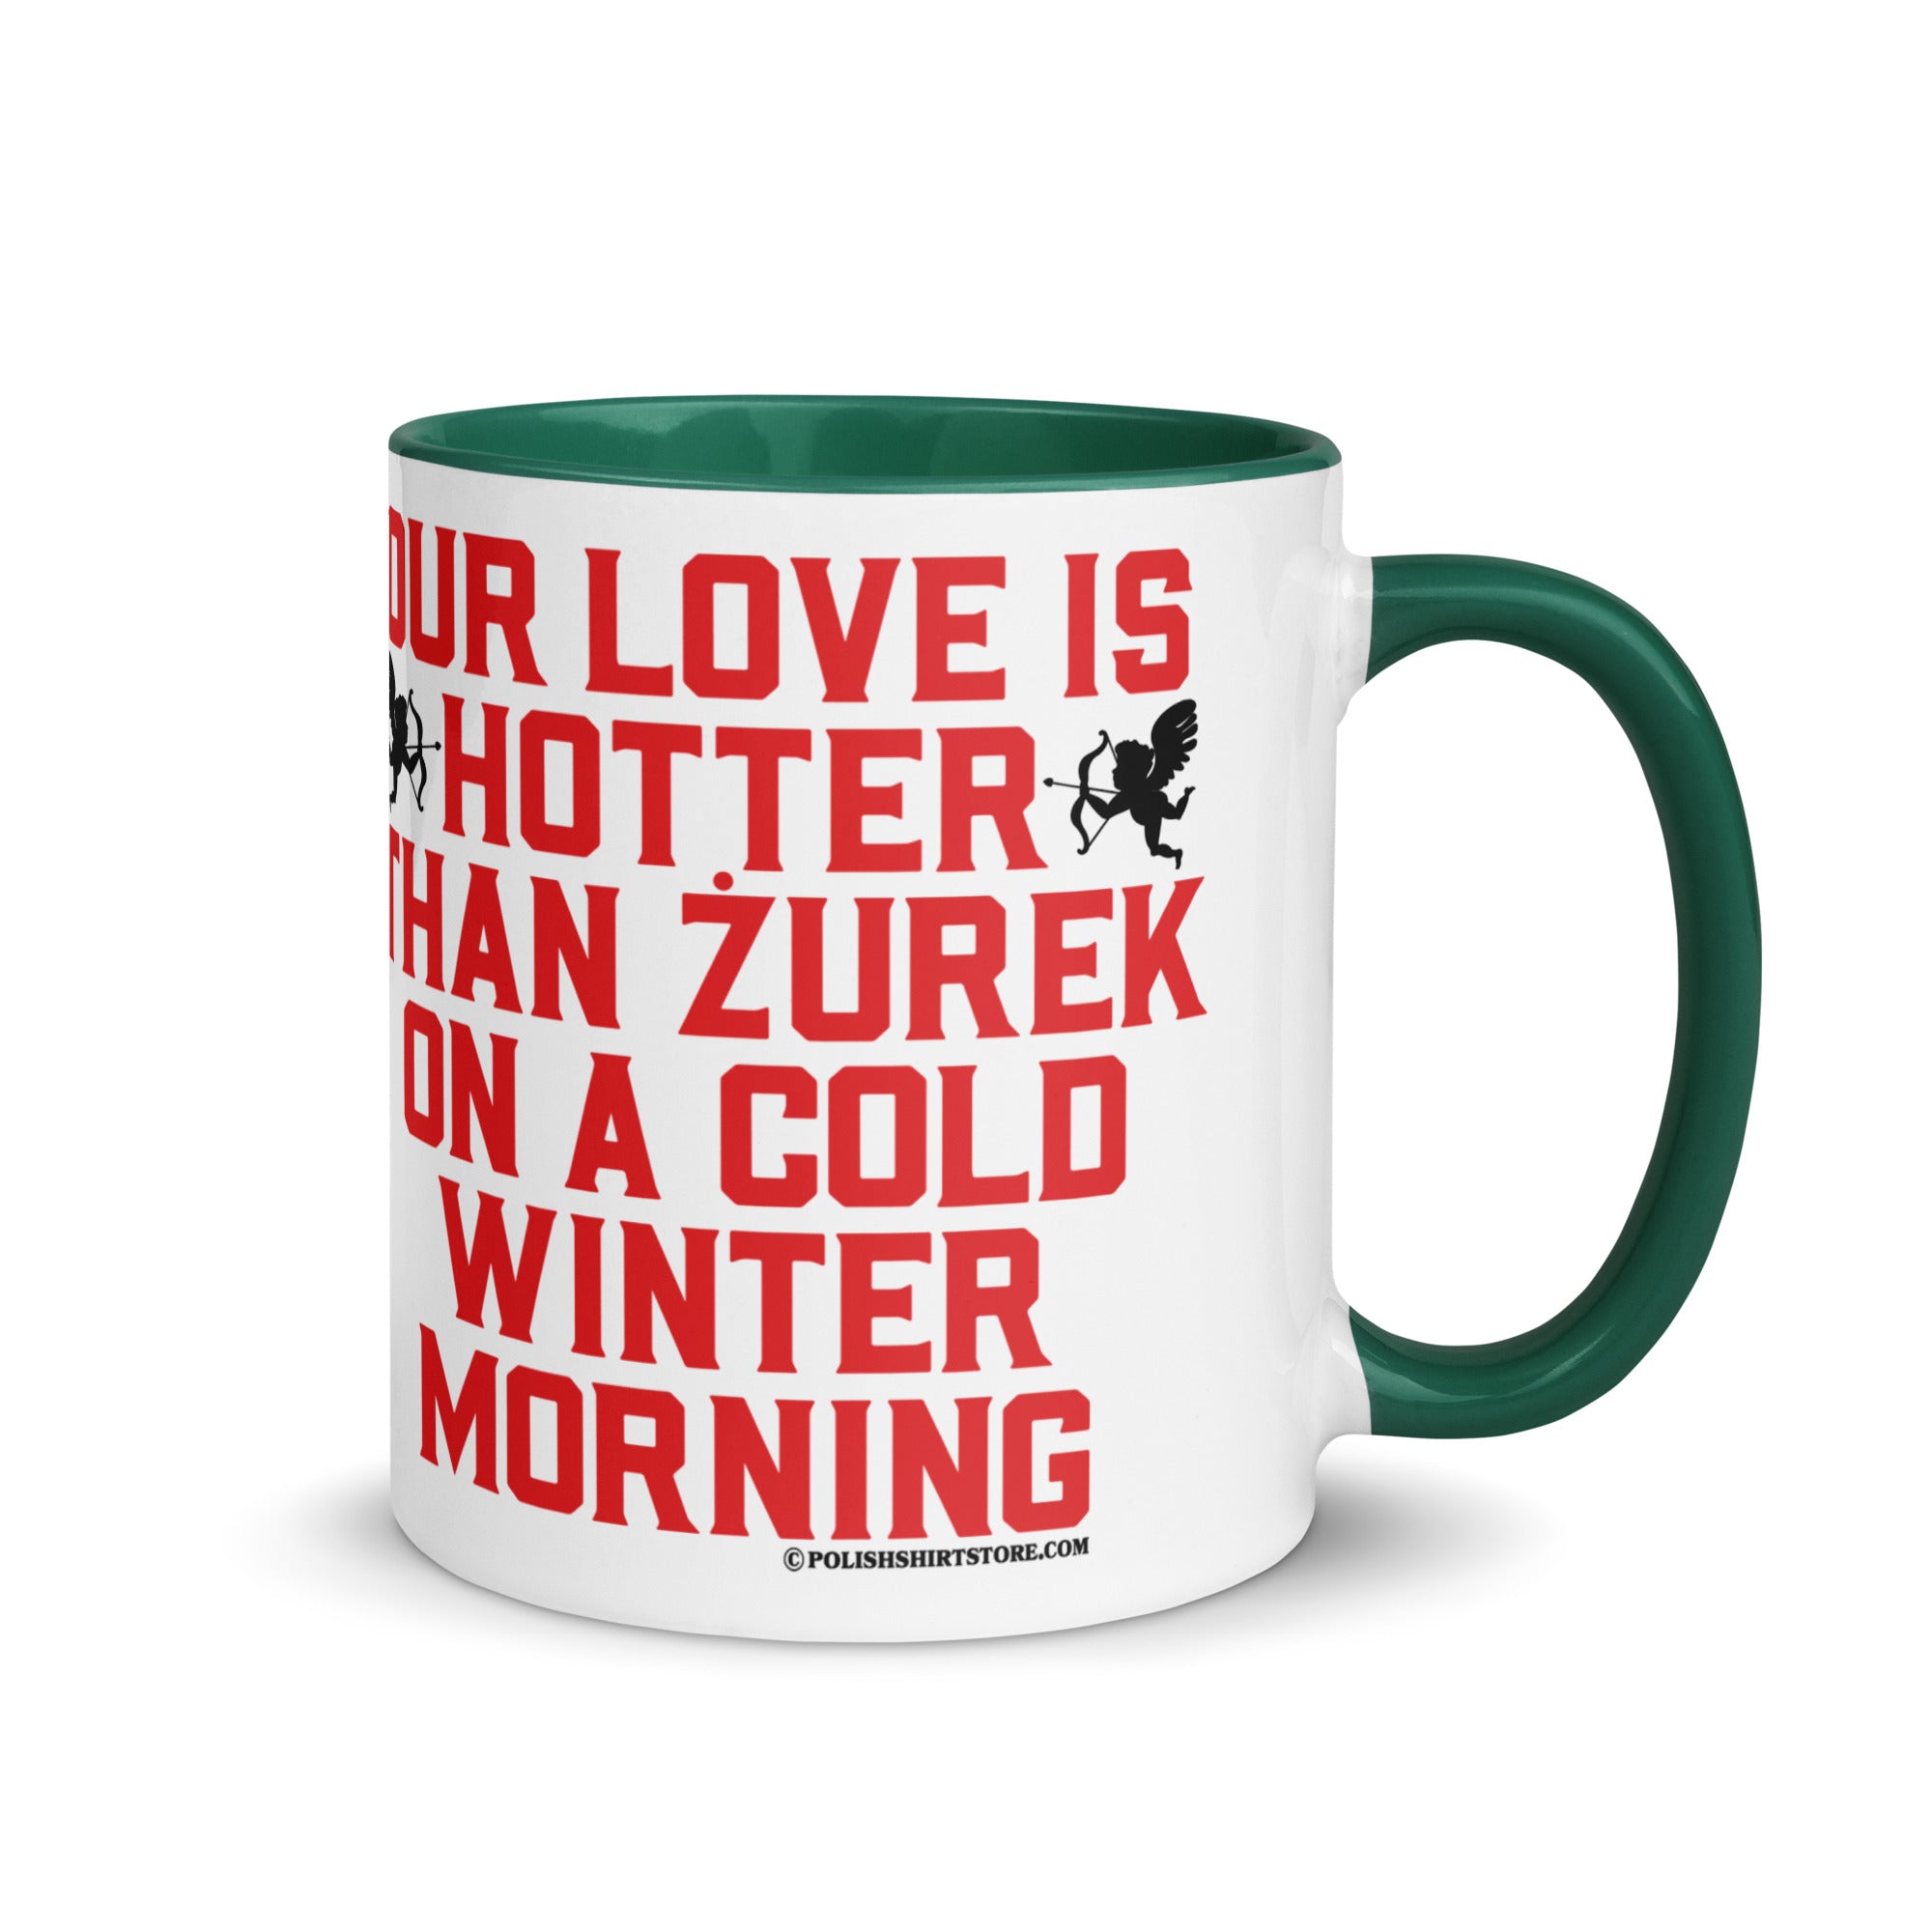 Our Love Is Hotter Than Zurek On A Cold Winter Morning Coffee Mug with Color Inside  Polish Shirt Store Dark green 11 oz 